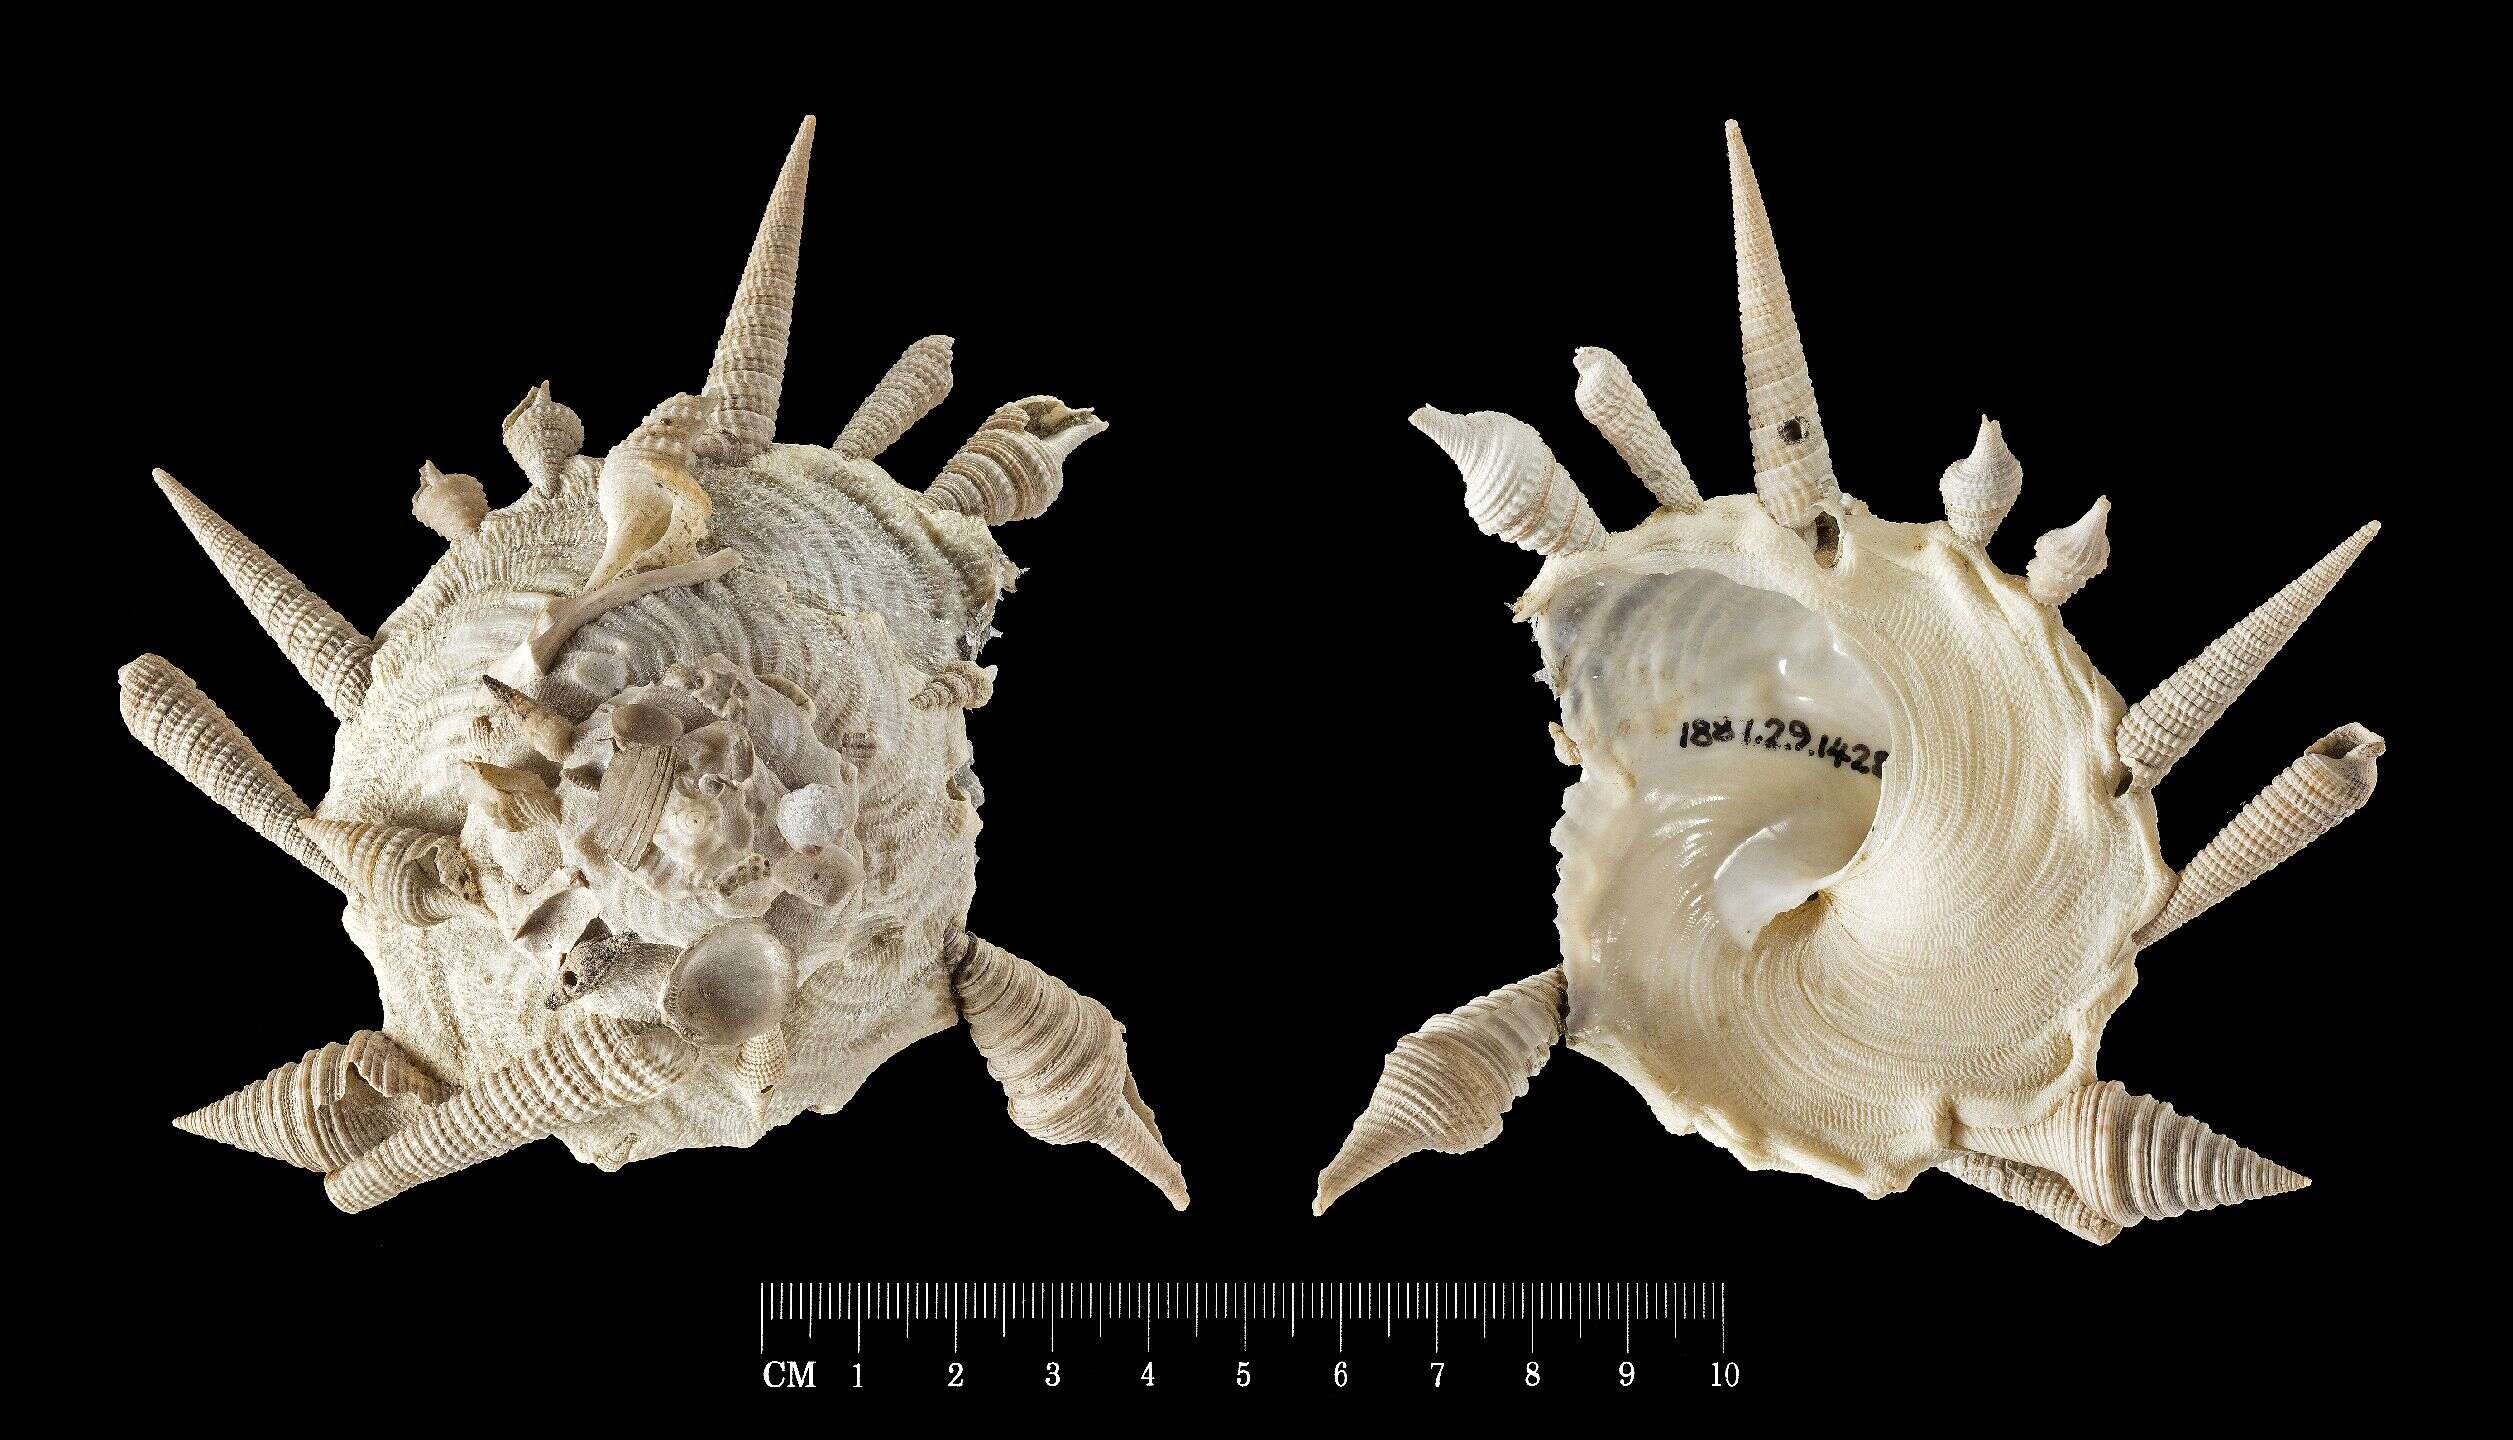 Image of pallid carriersnail